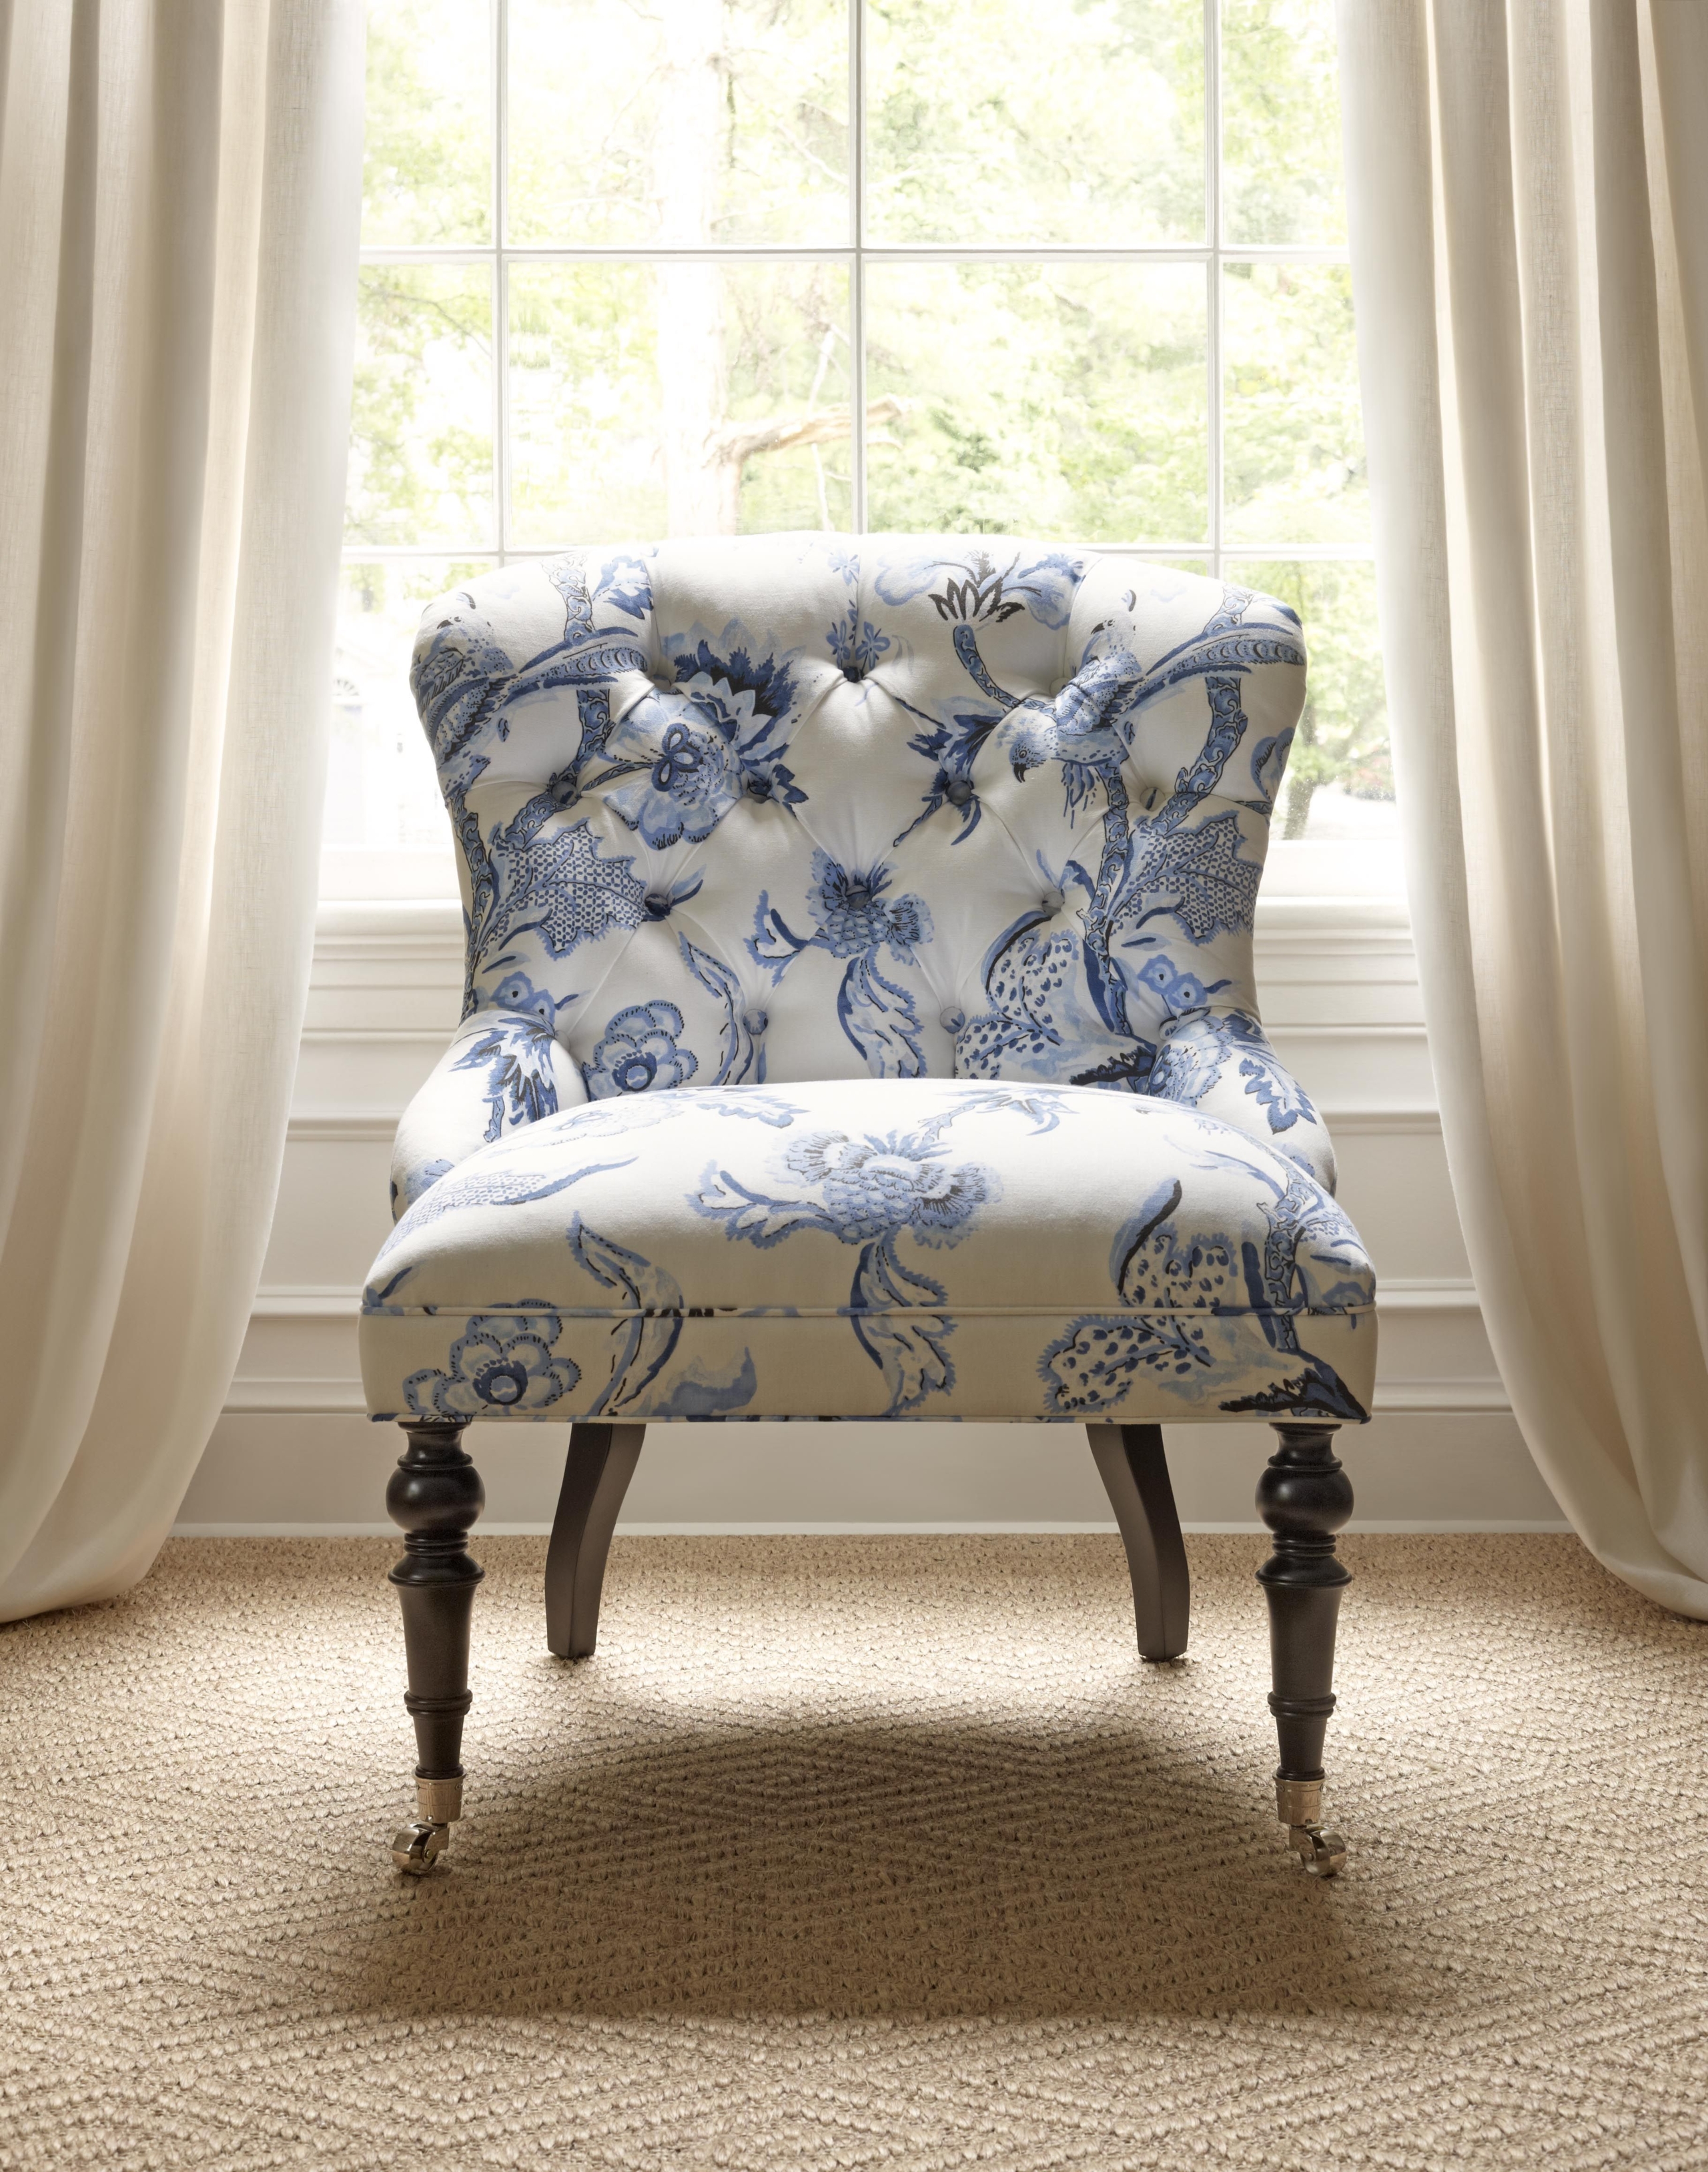 Chair upholstered in shrewsbury linen cotton blend by thibault floral